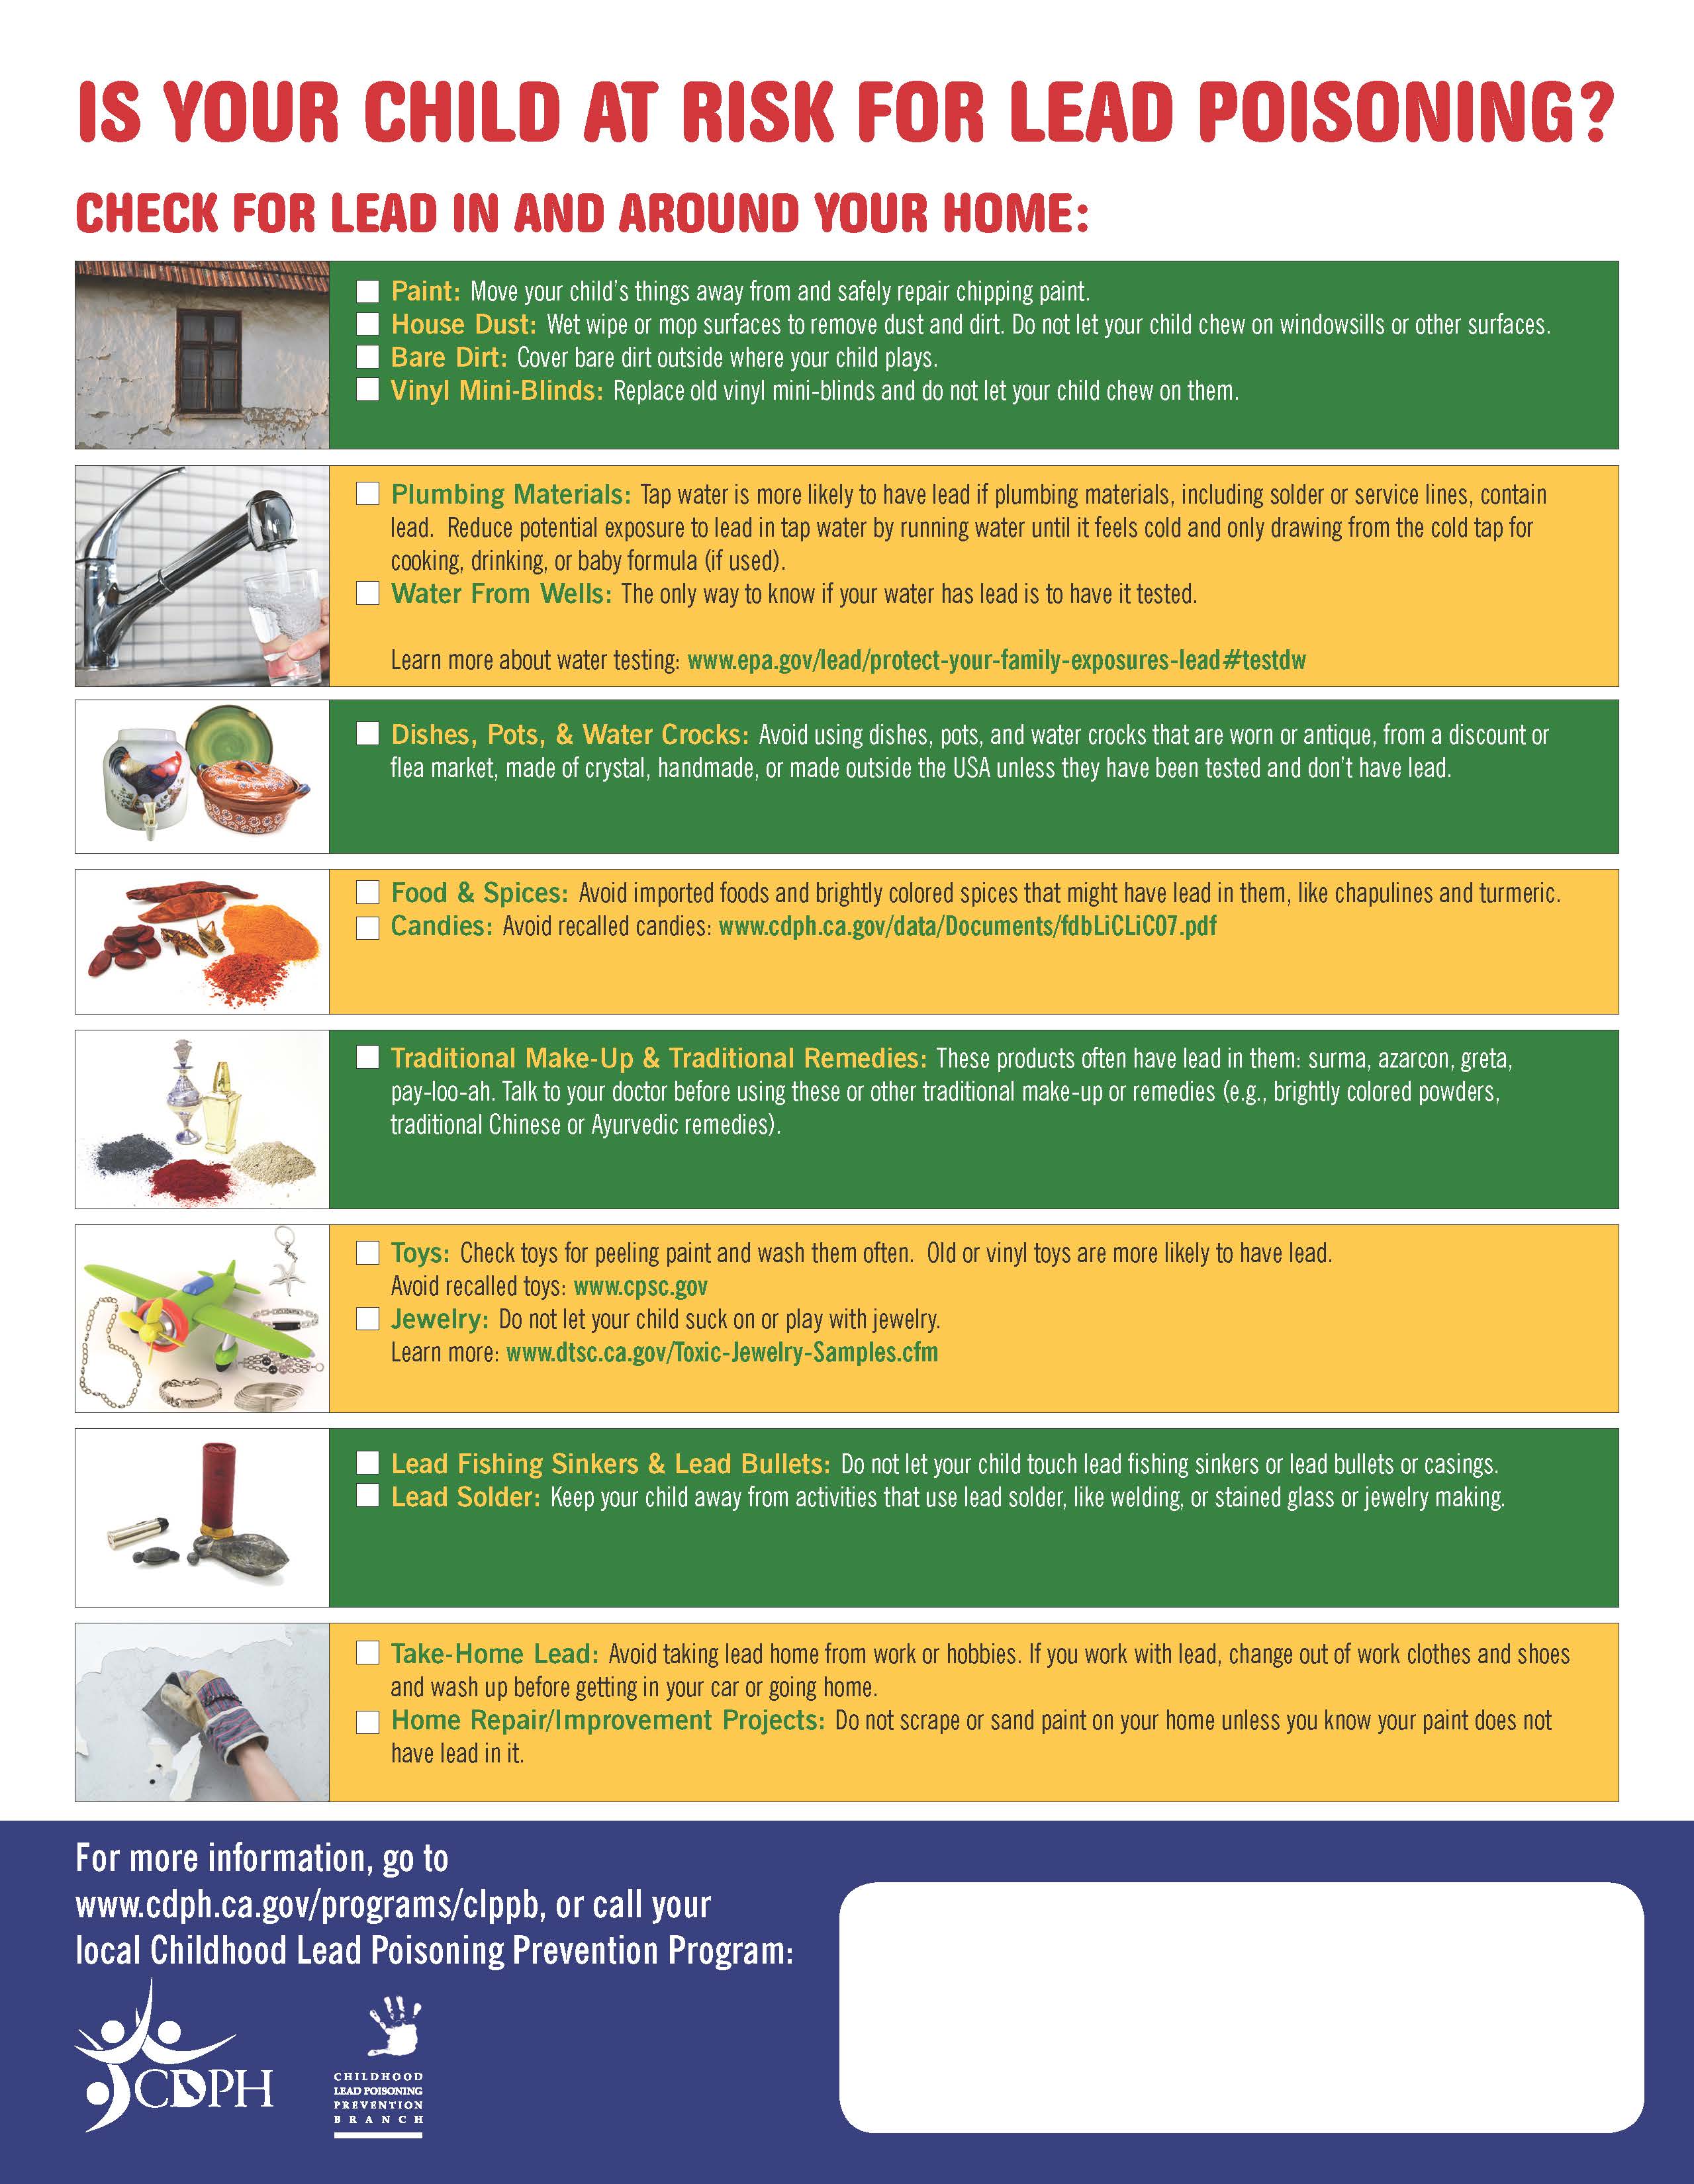 Check for Lead In and Around Your Home flyer